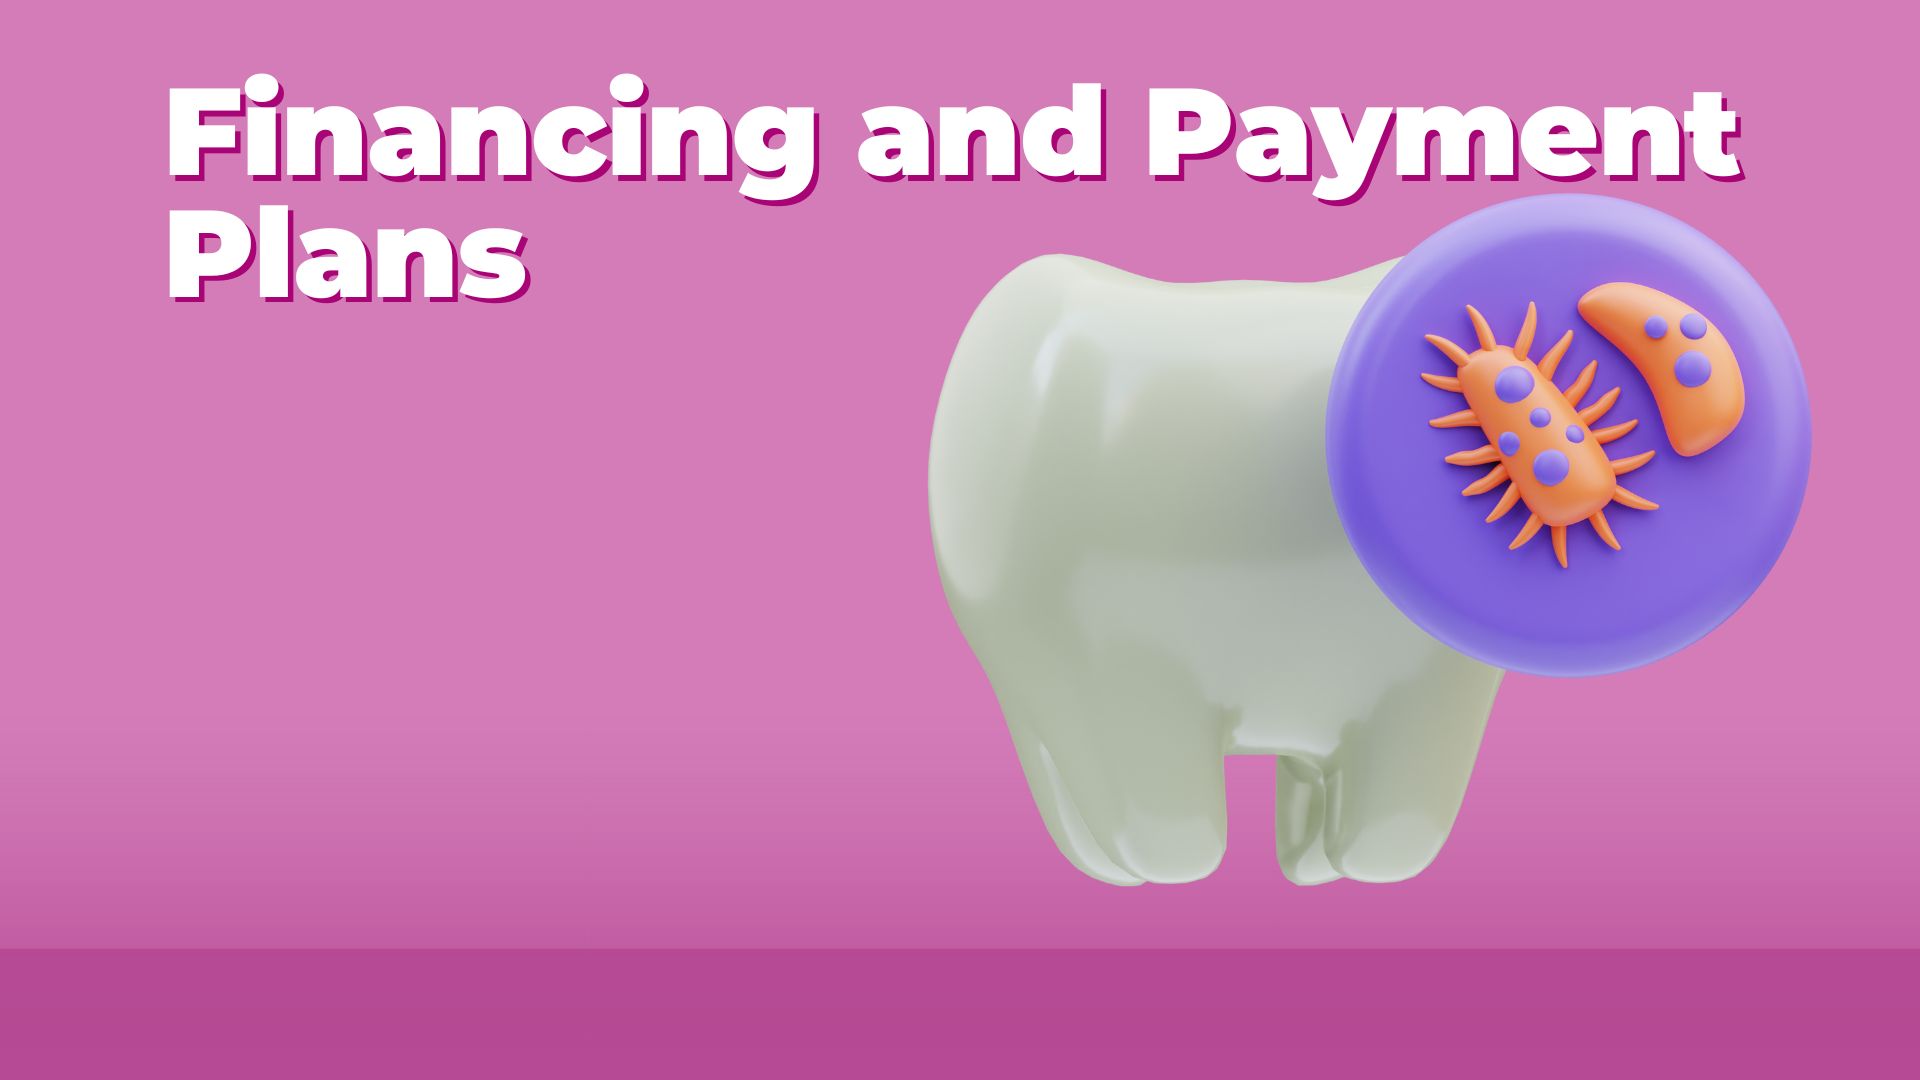 Financing and Payment Plans